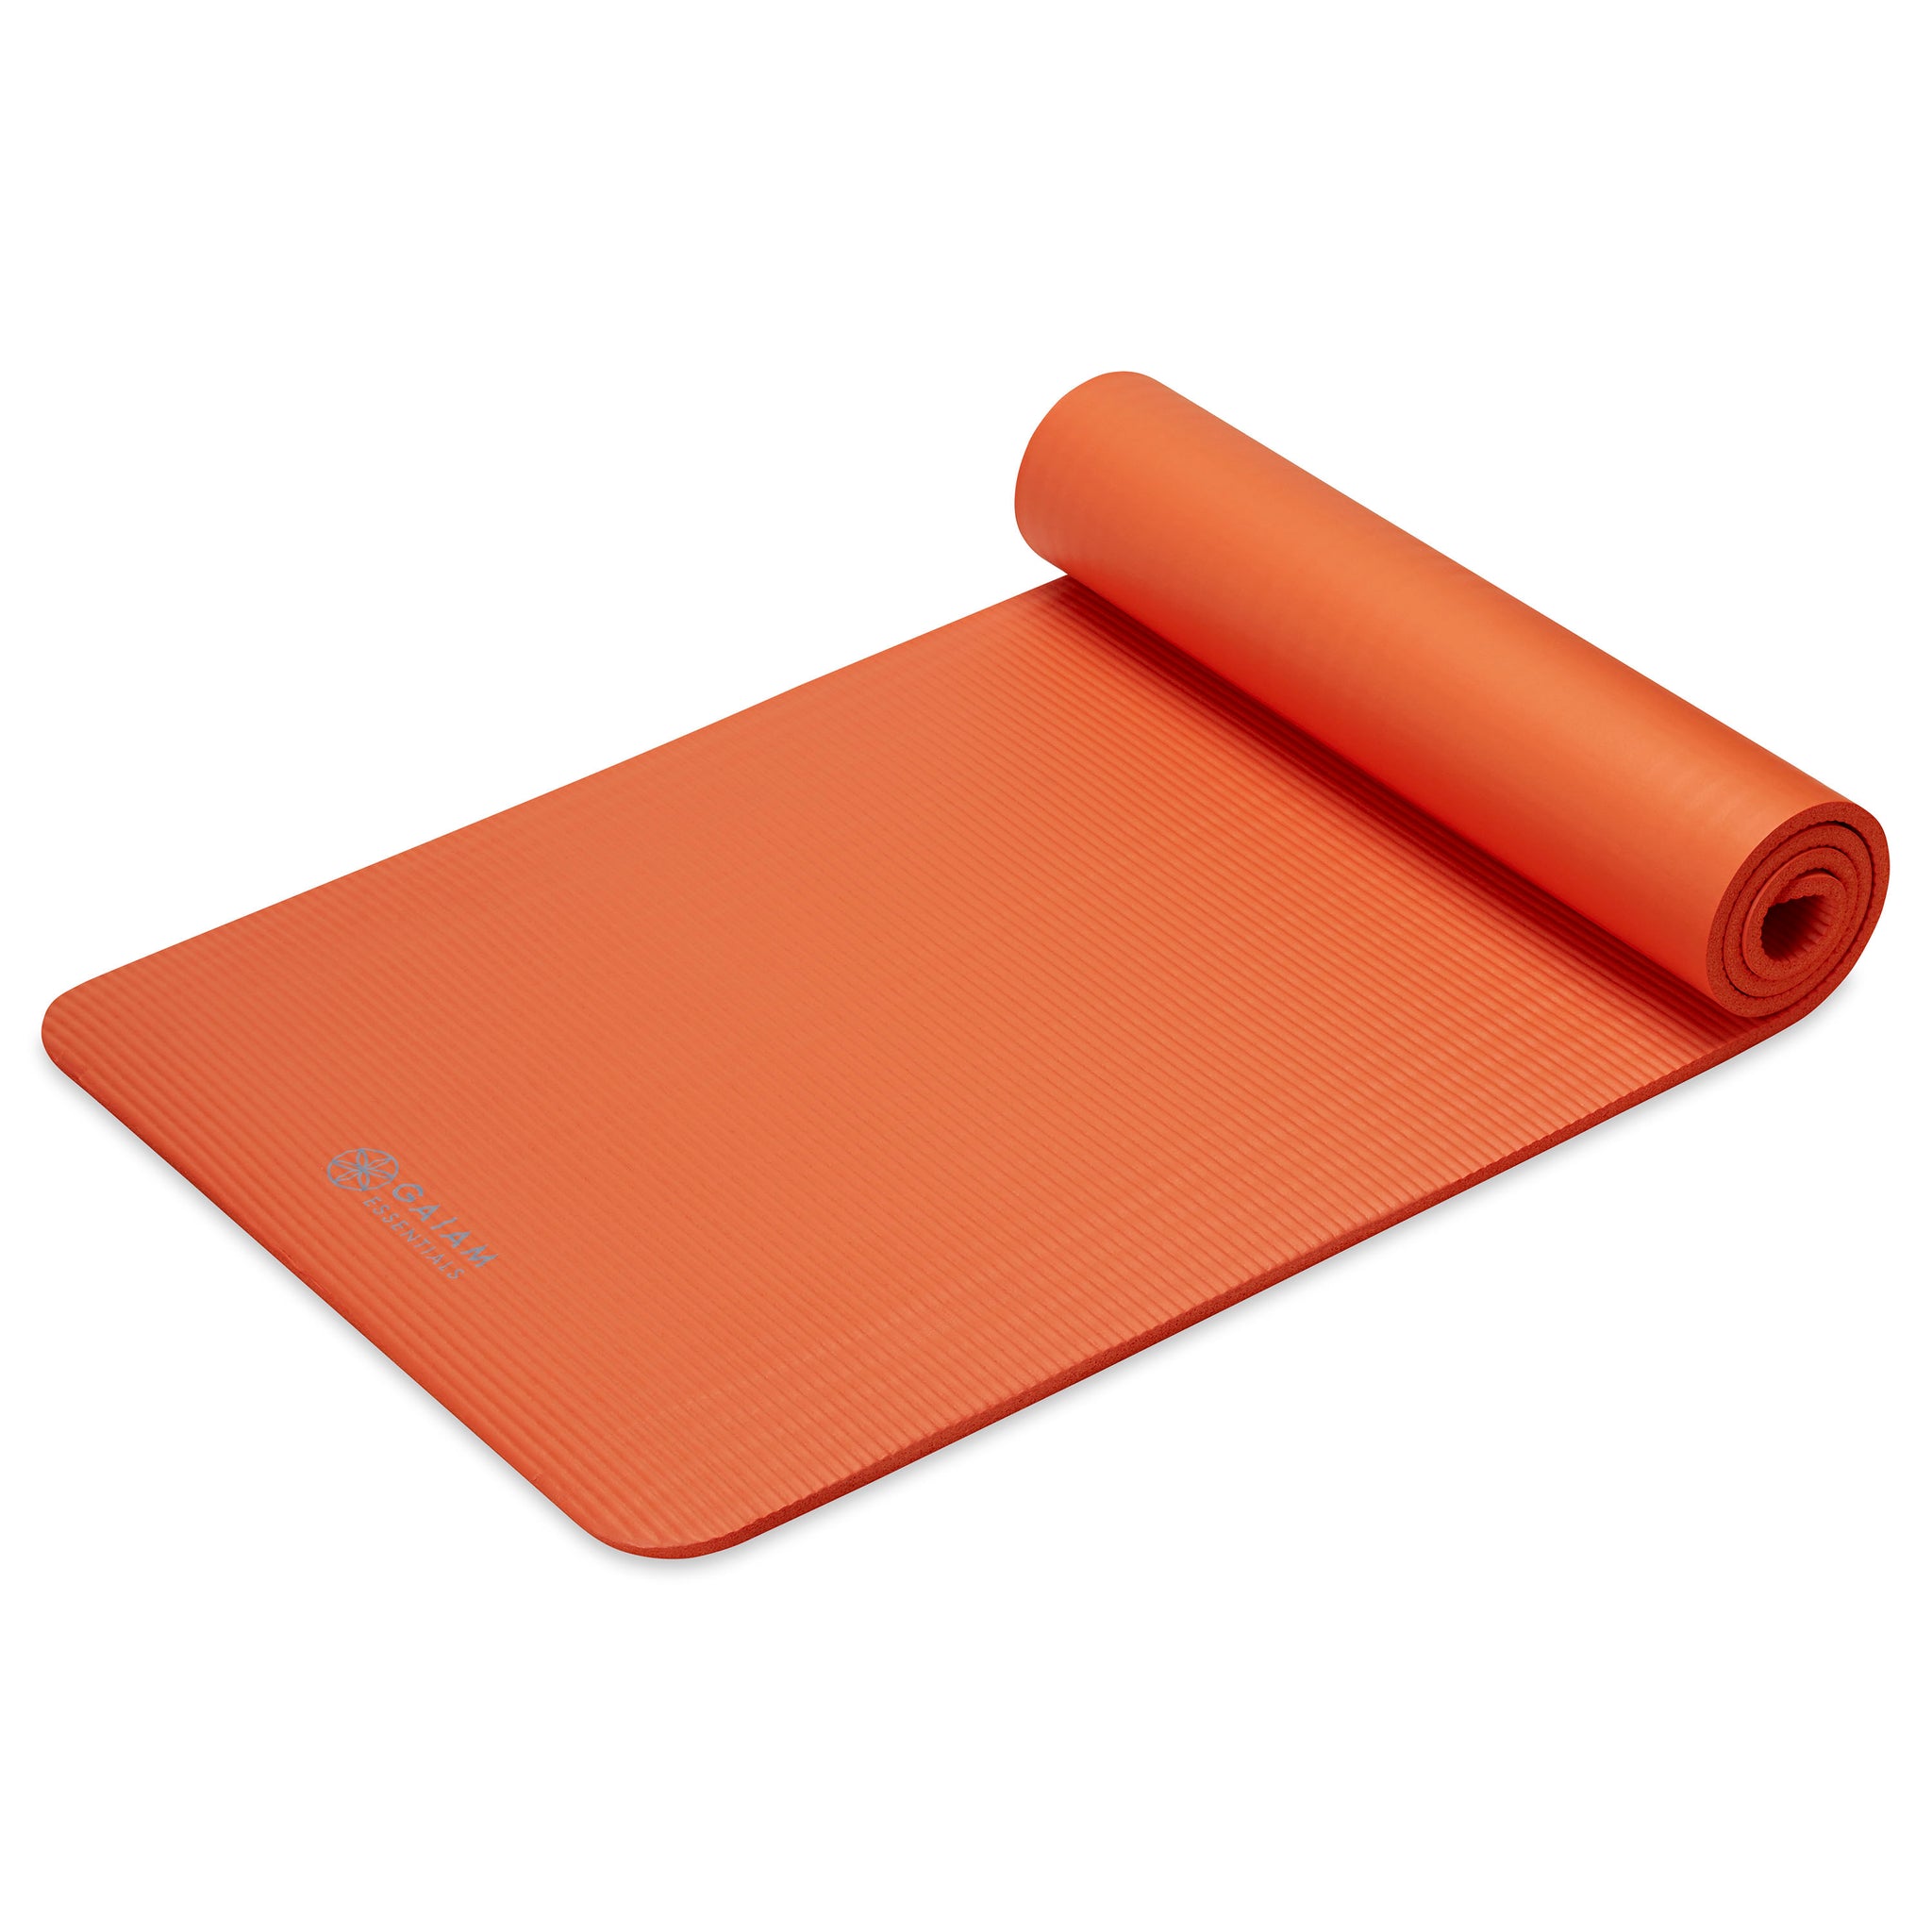 Gaiam Essentials Thick Yoga Mat Fitness & Exercise Mat with Easy-Cinch Yoga  Mat Carrier Strap, 72L x 24W x 2/5 Inch 